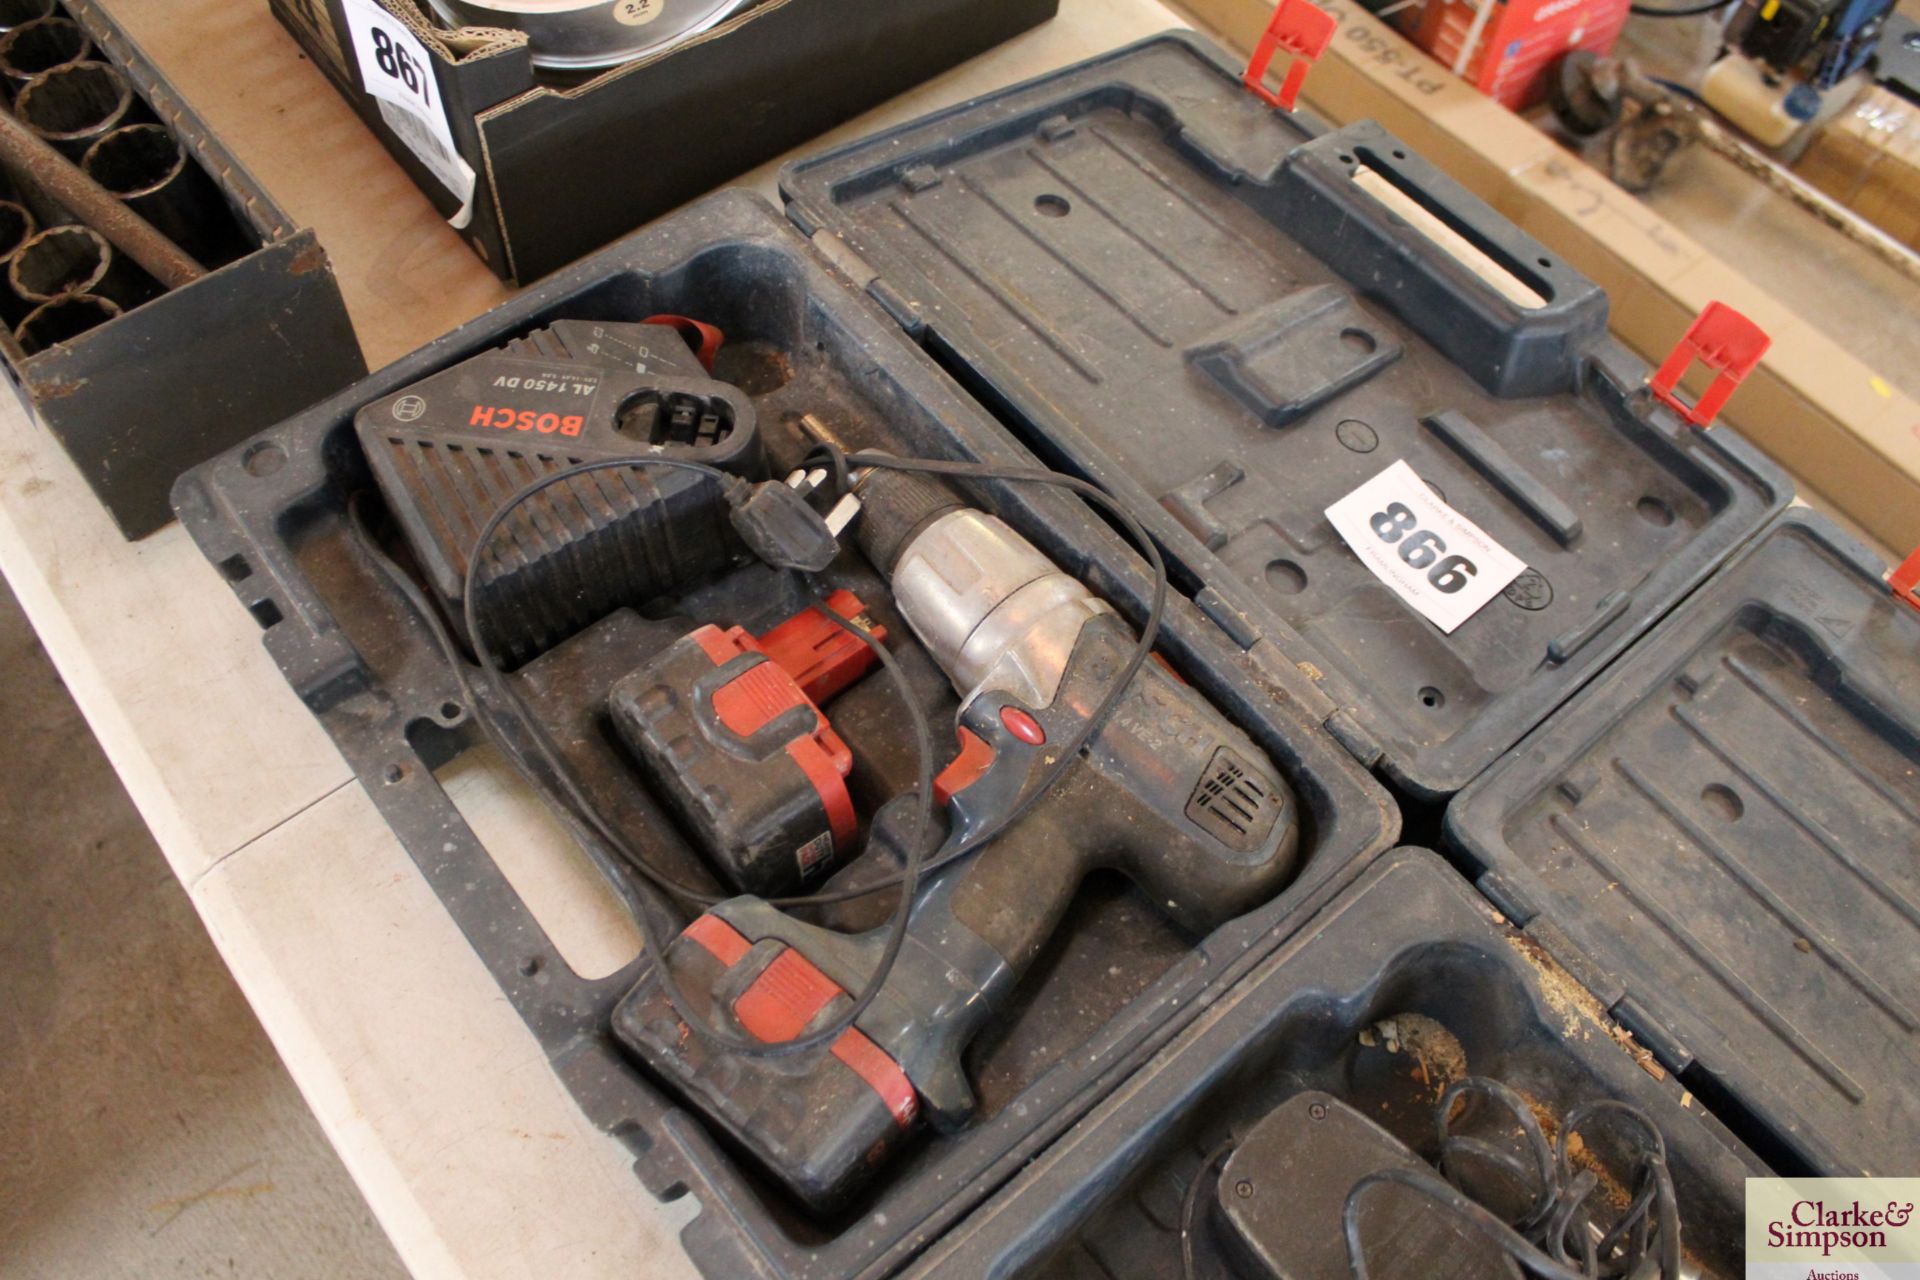 Bosch GSB cordless 14.4v drill with 2 batteries and charger.